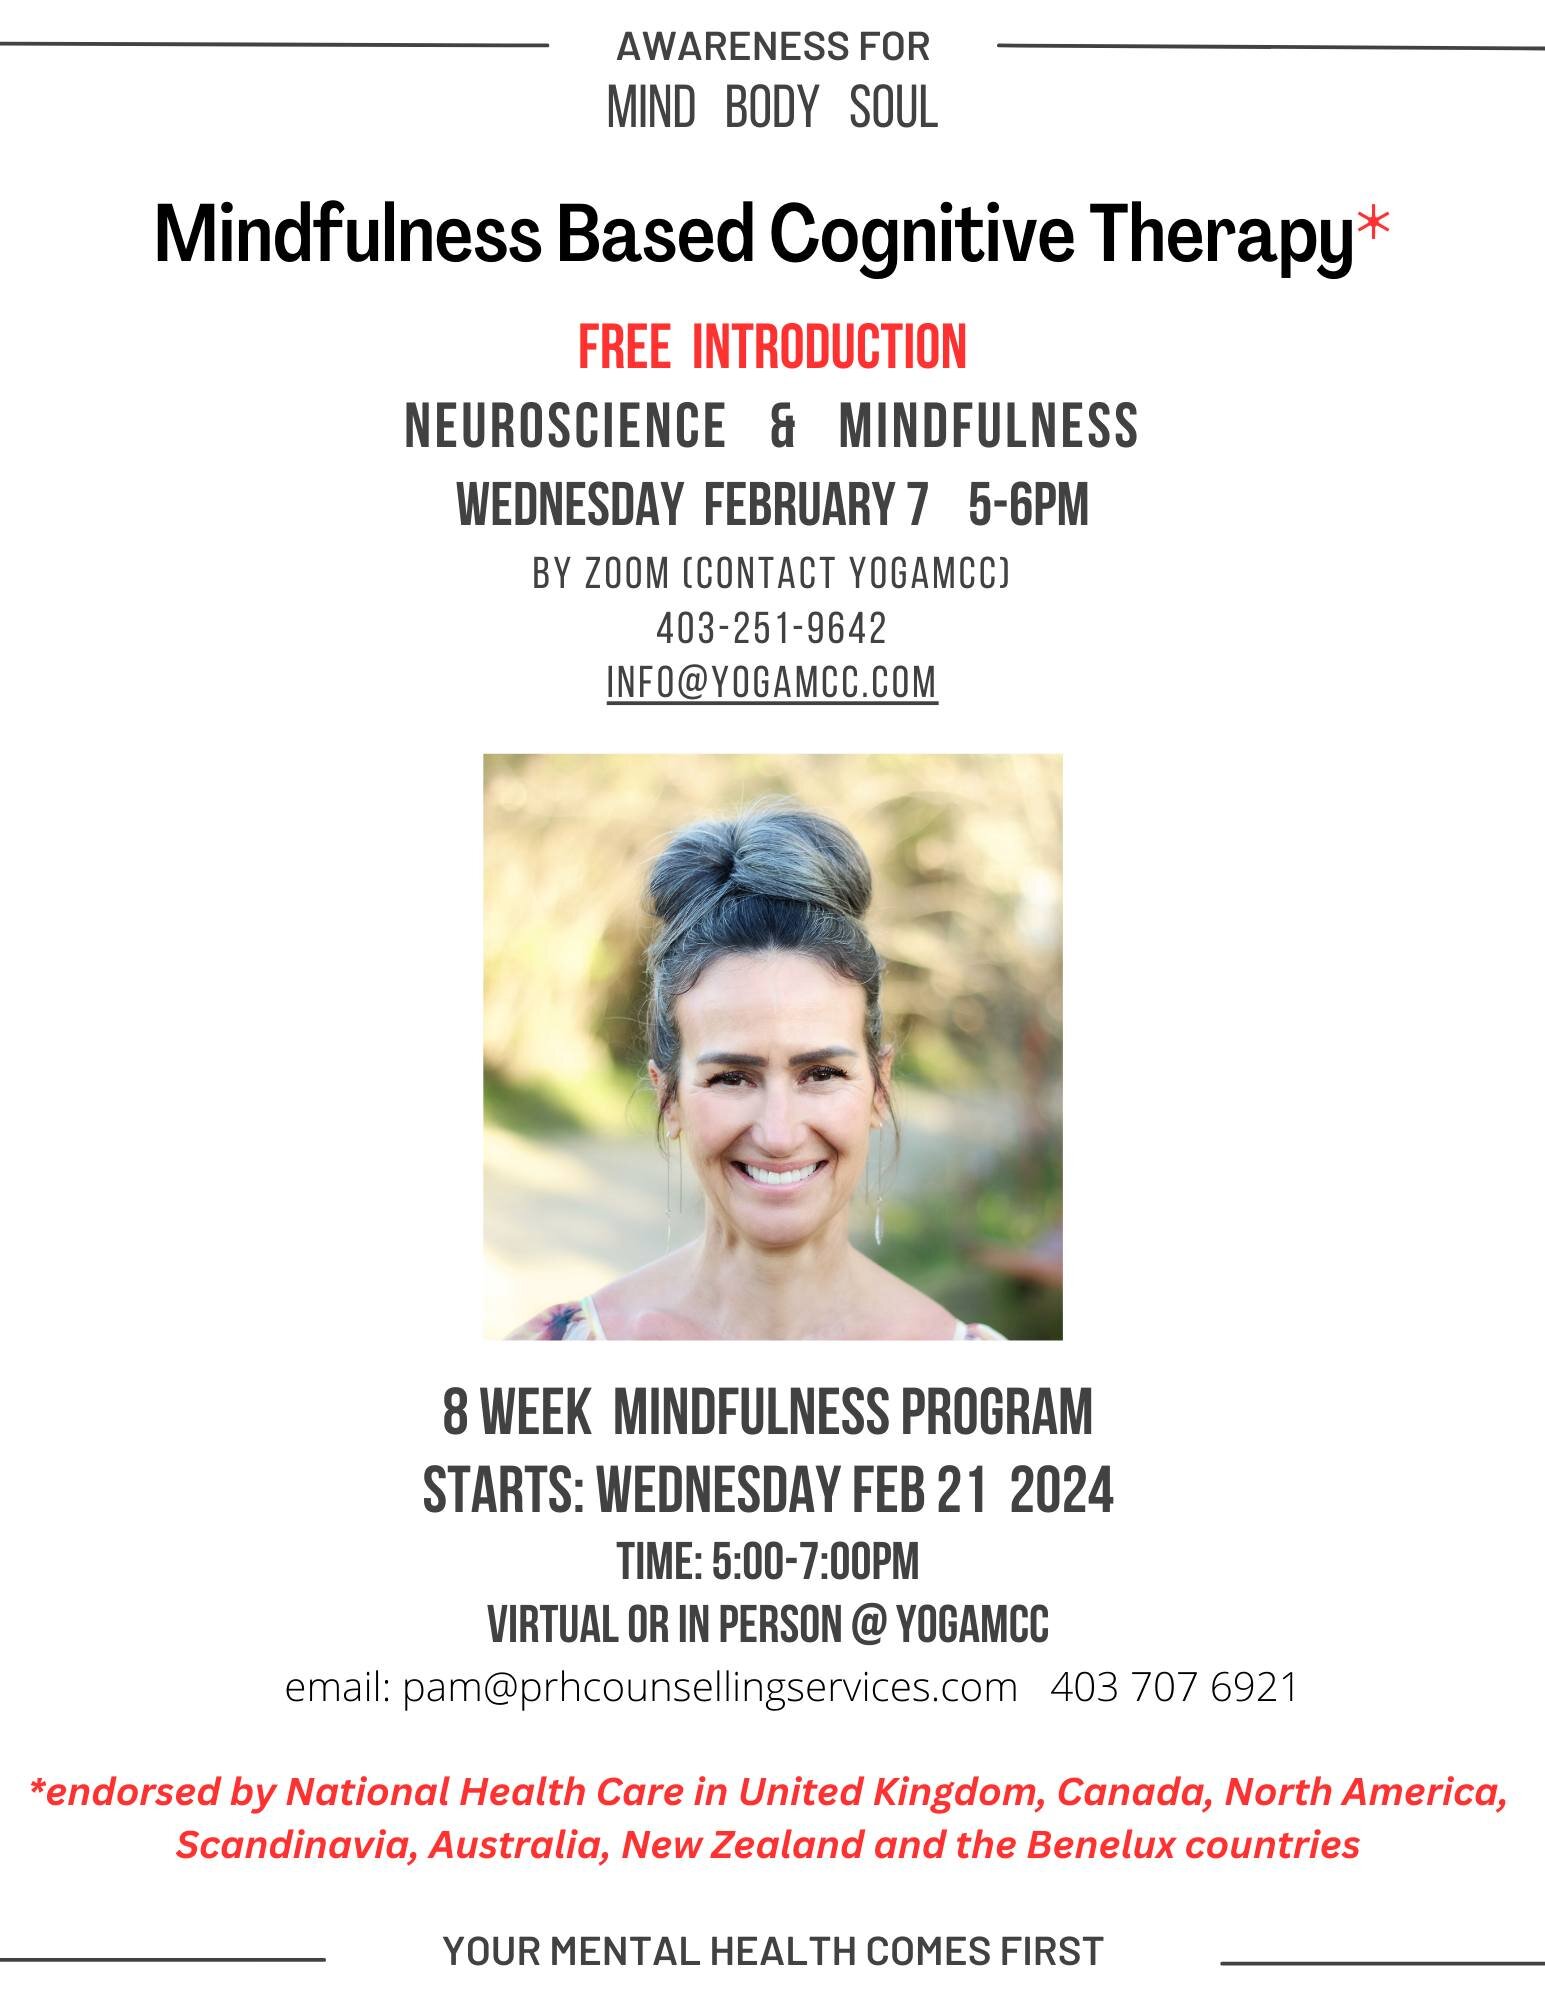 Learn to manage stress, anxiety &amp; prevent the relapse of depression

Mindfulness Based Cognitive Therapy (MBCT) is an evidence-based mindfulness therapeutic modality supporting individual mental health and wellness.  MBCT is endorsed by National 